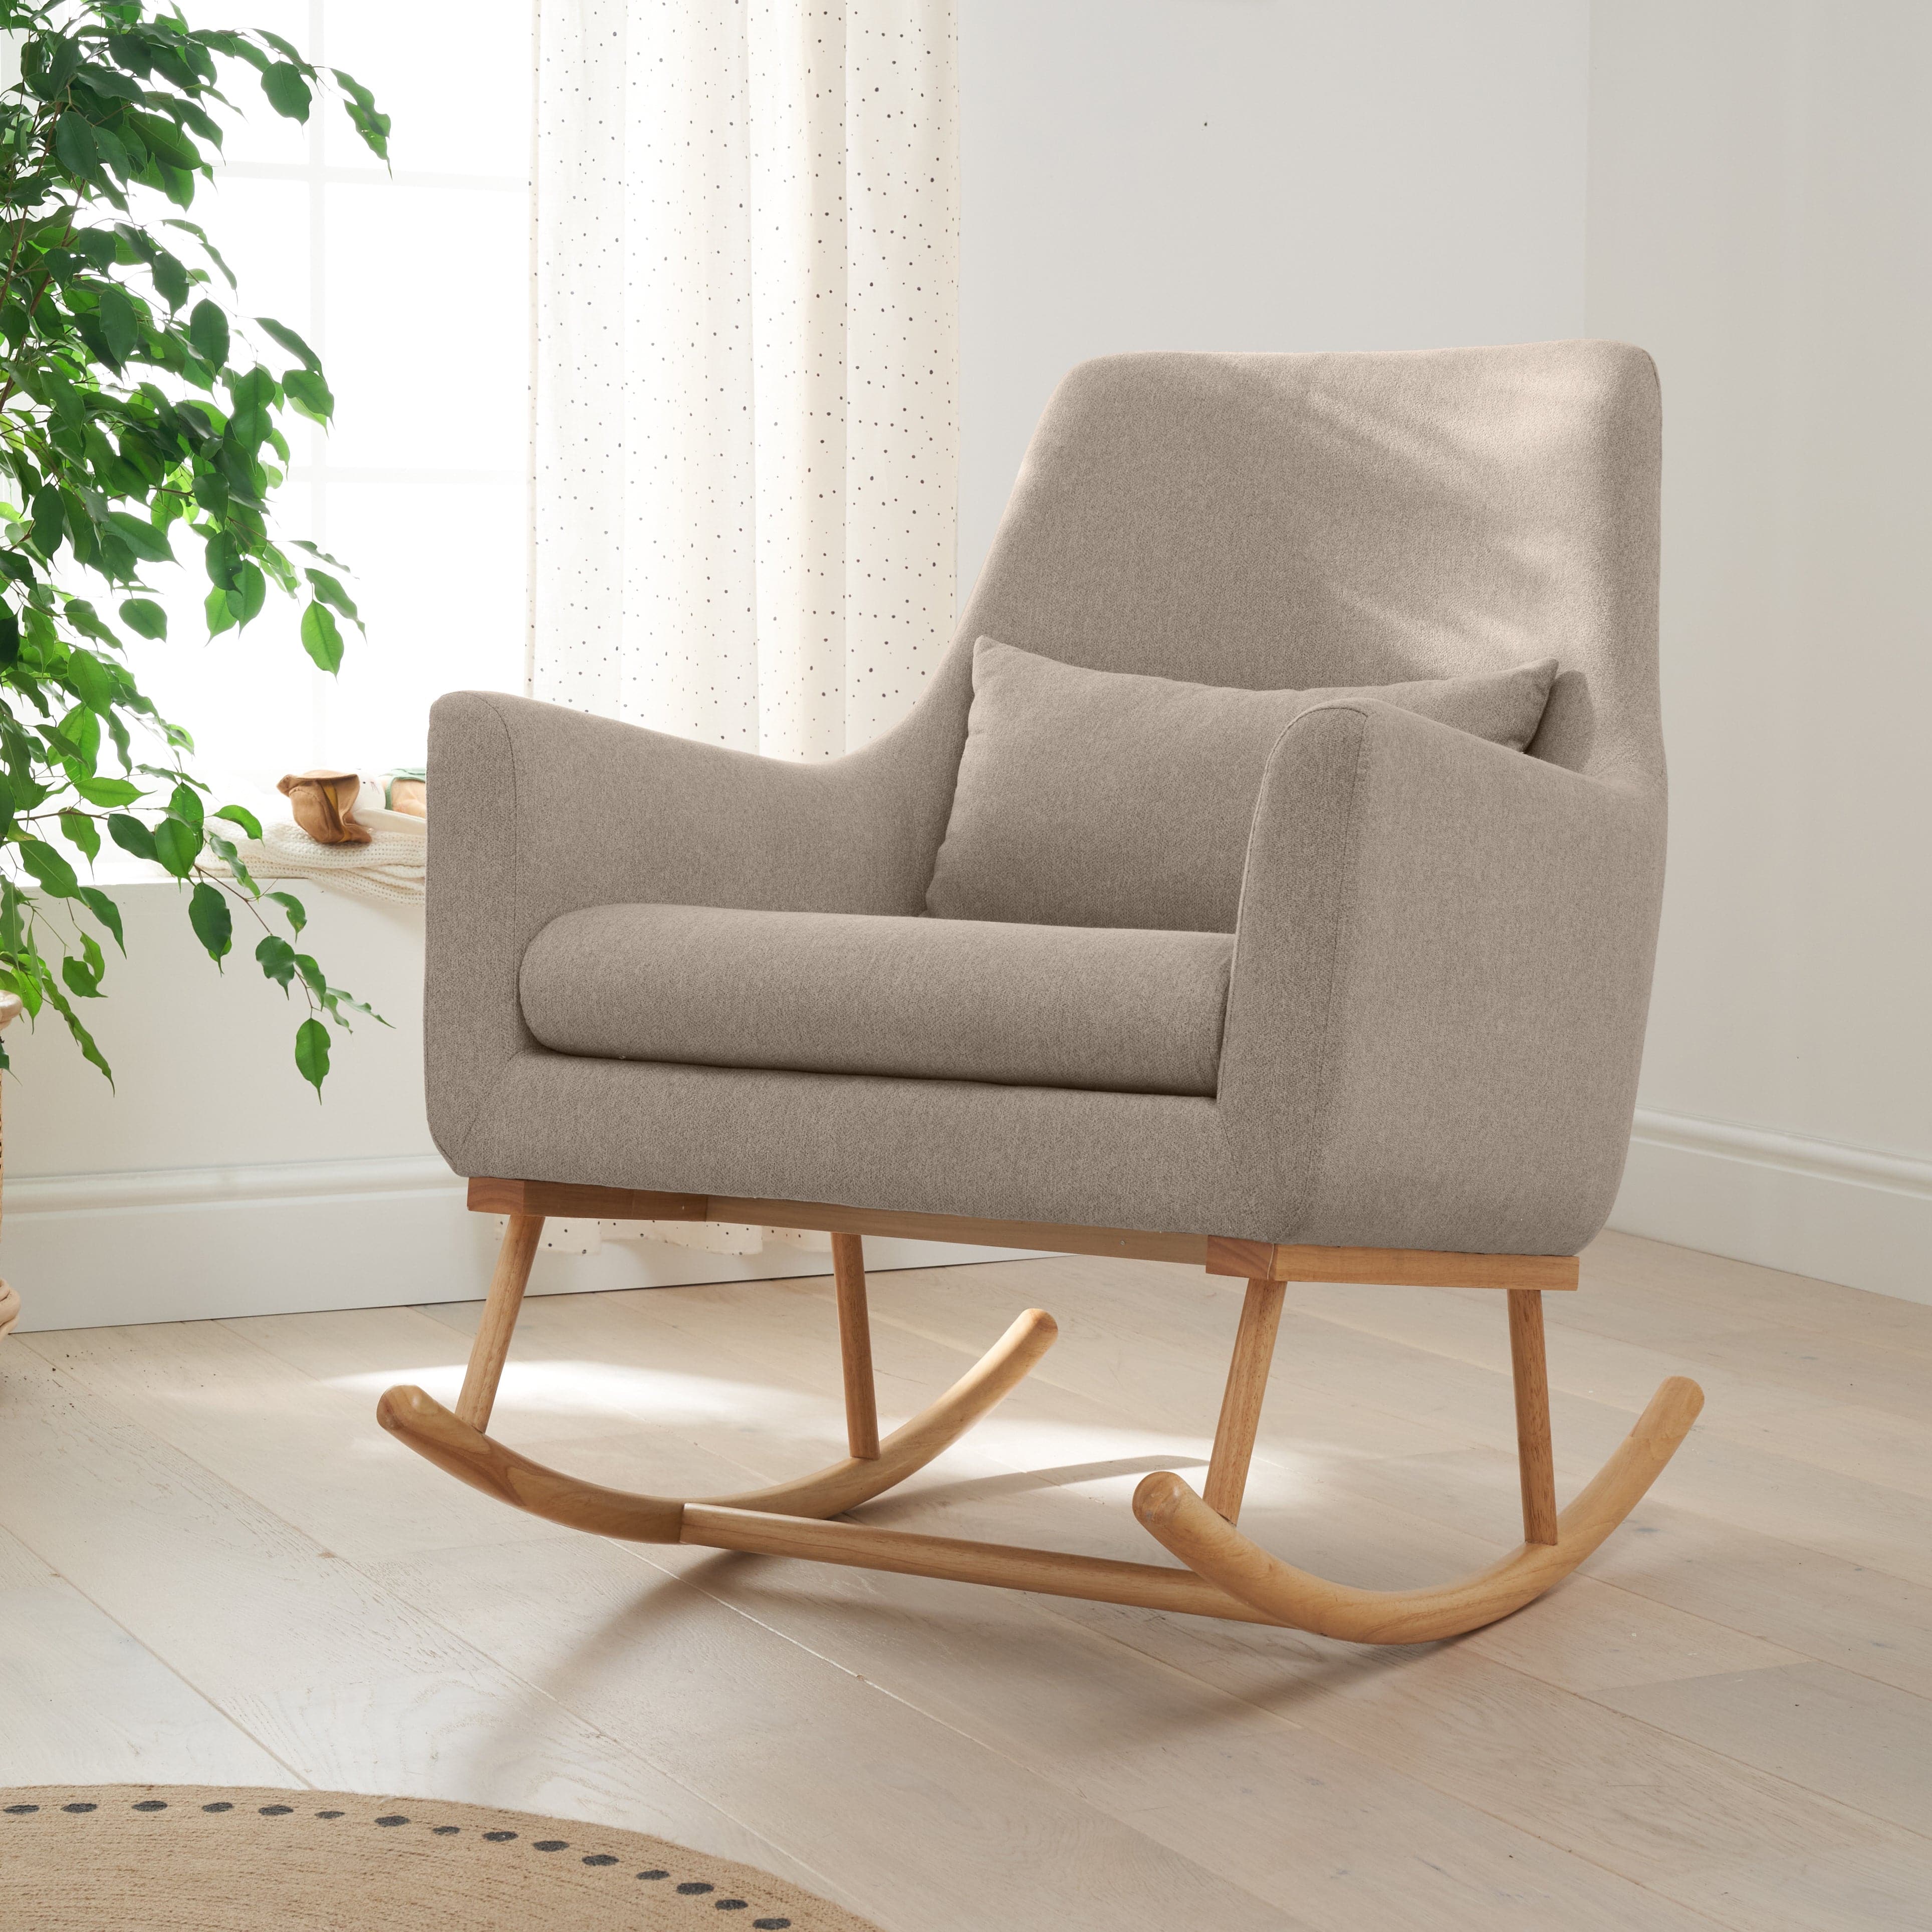 Tutti Bambini Oscar Rocking Chair - Stone/Natural - For Your Little One